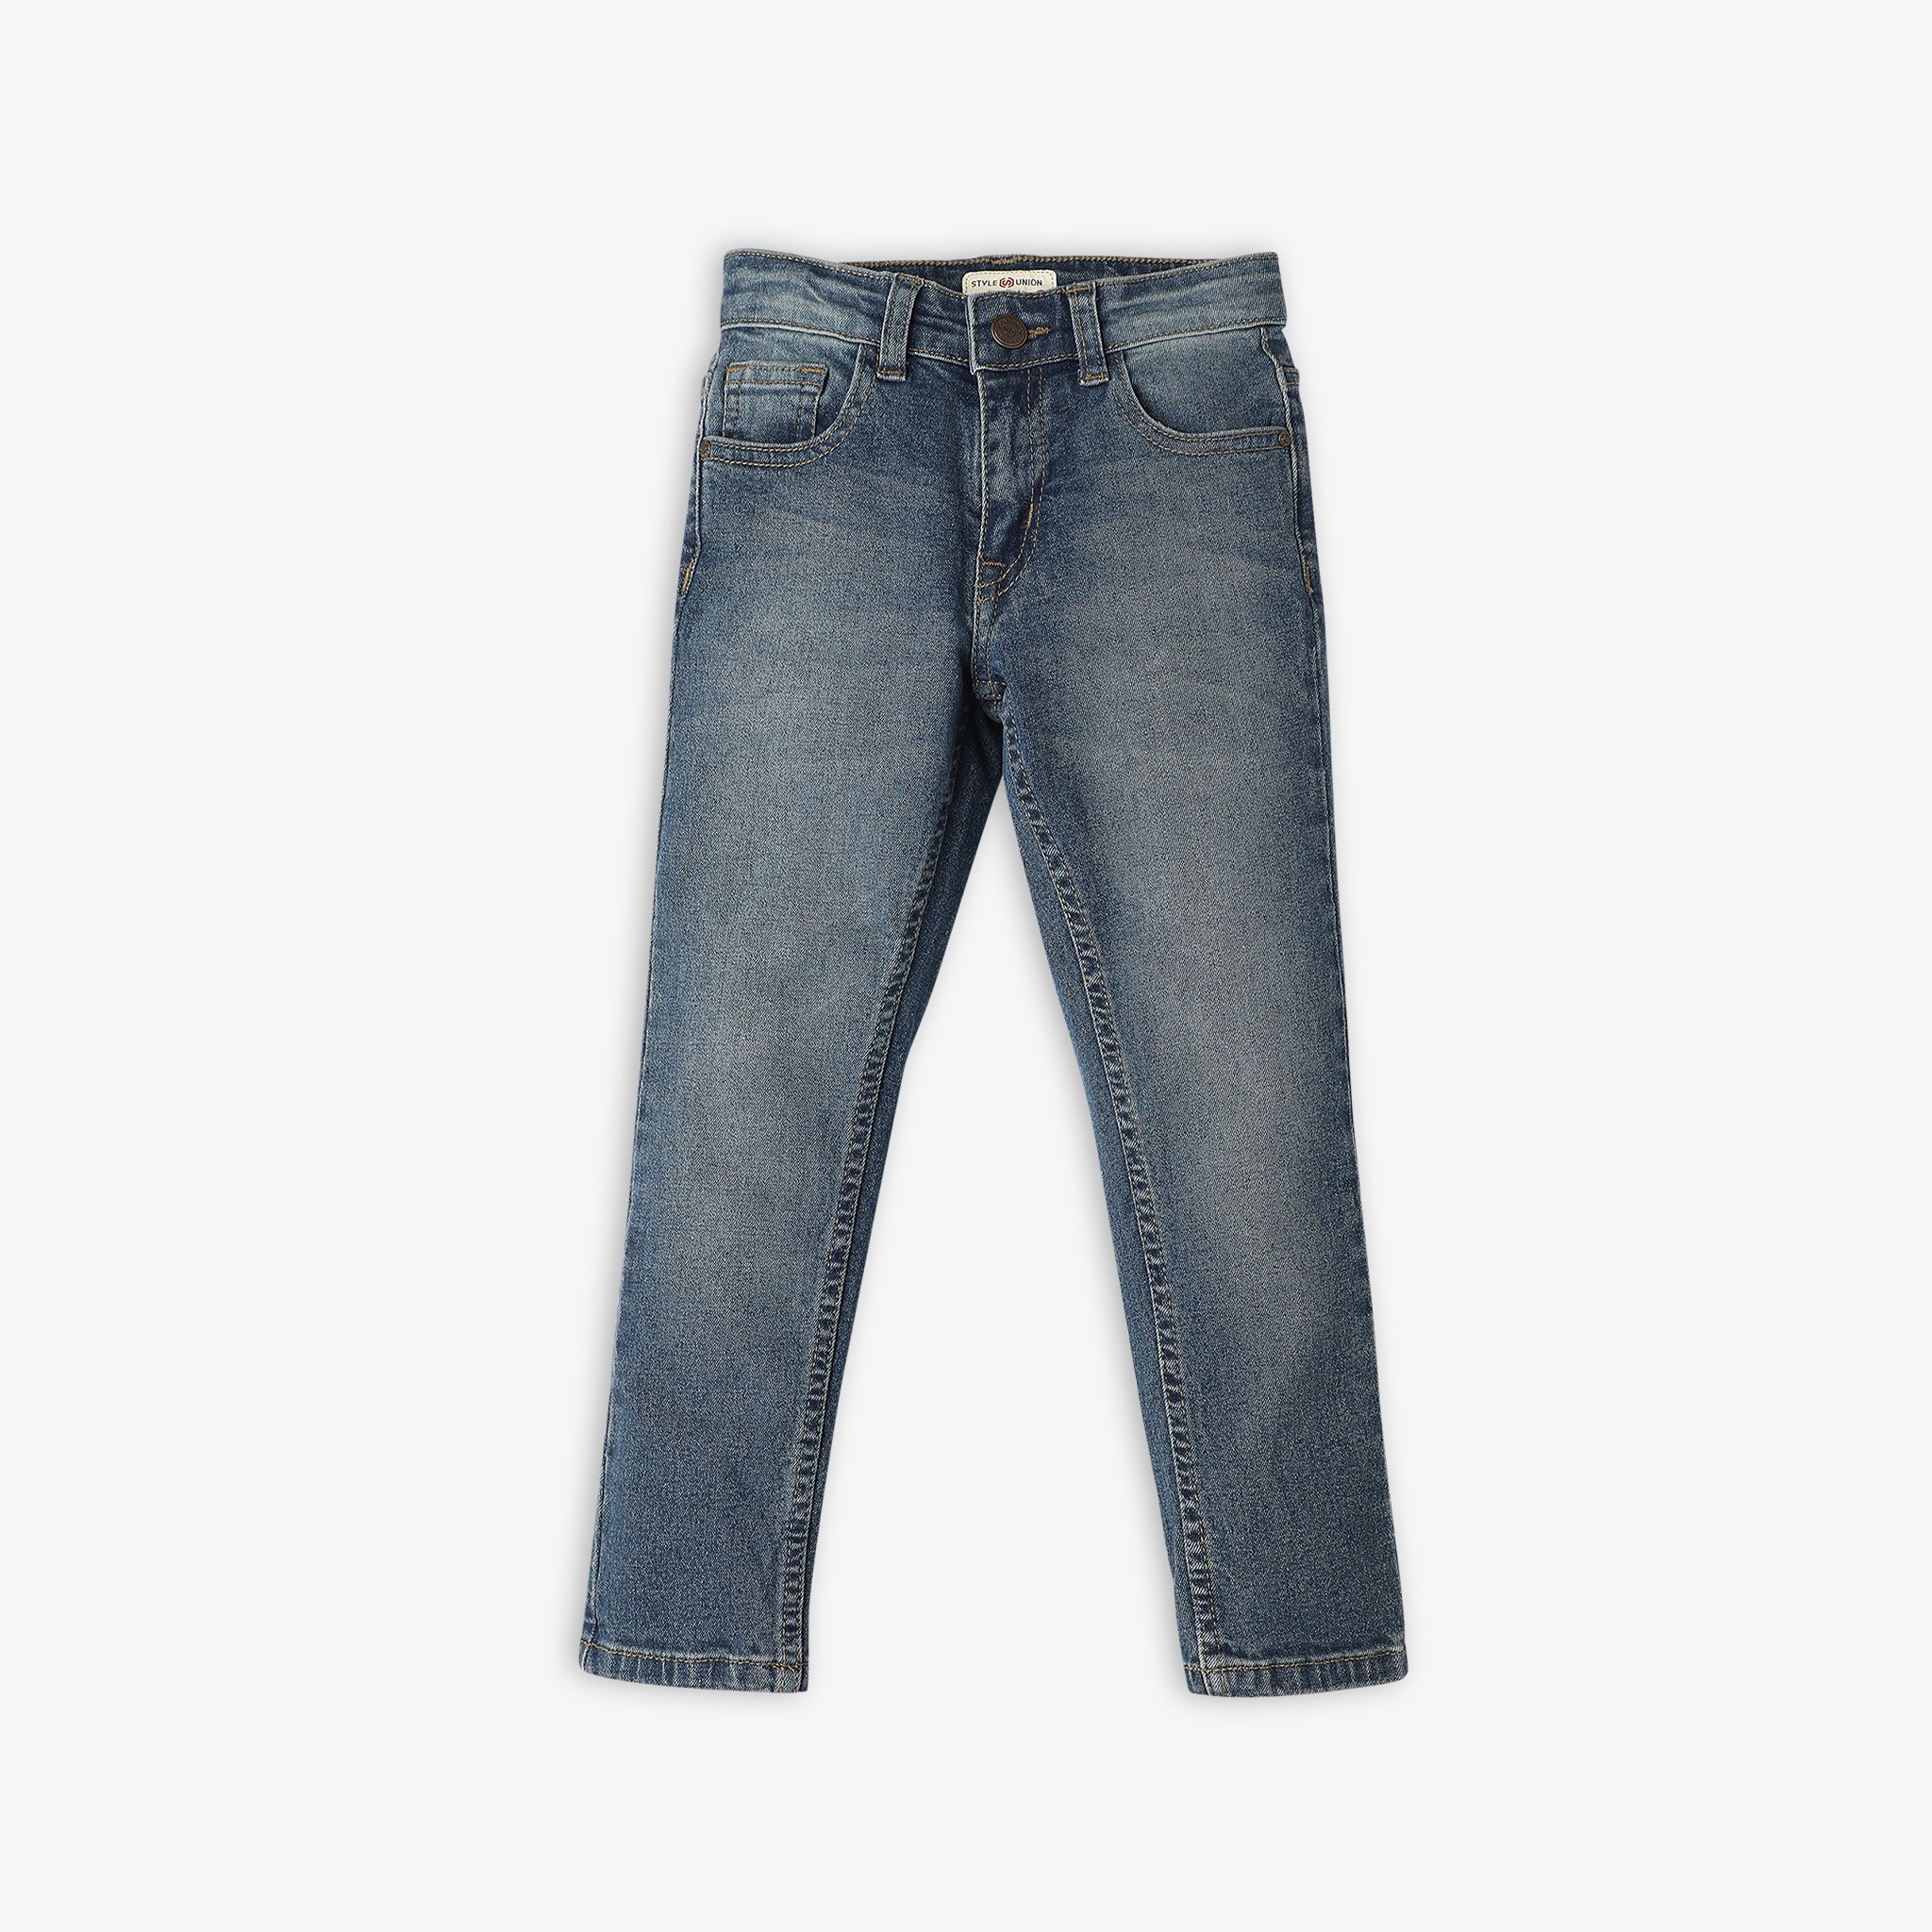 Boys Regular Fit Solid Mid Rise Jeans